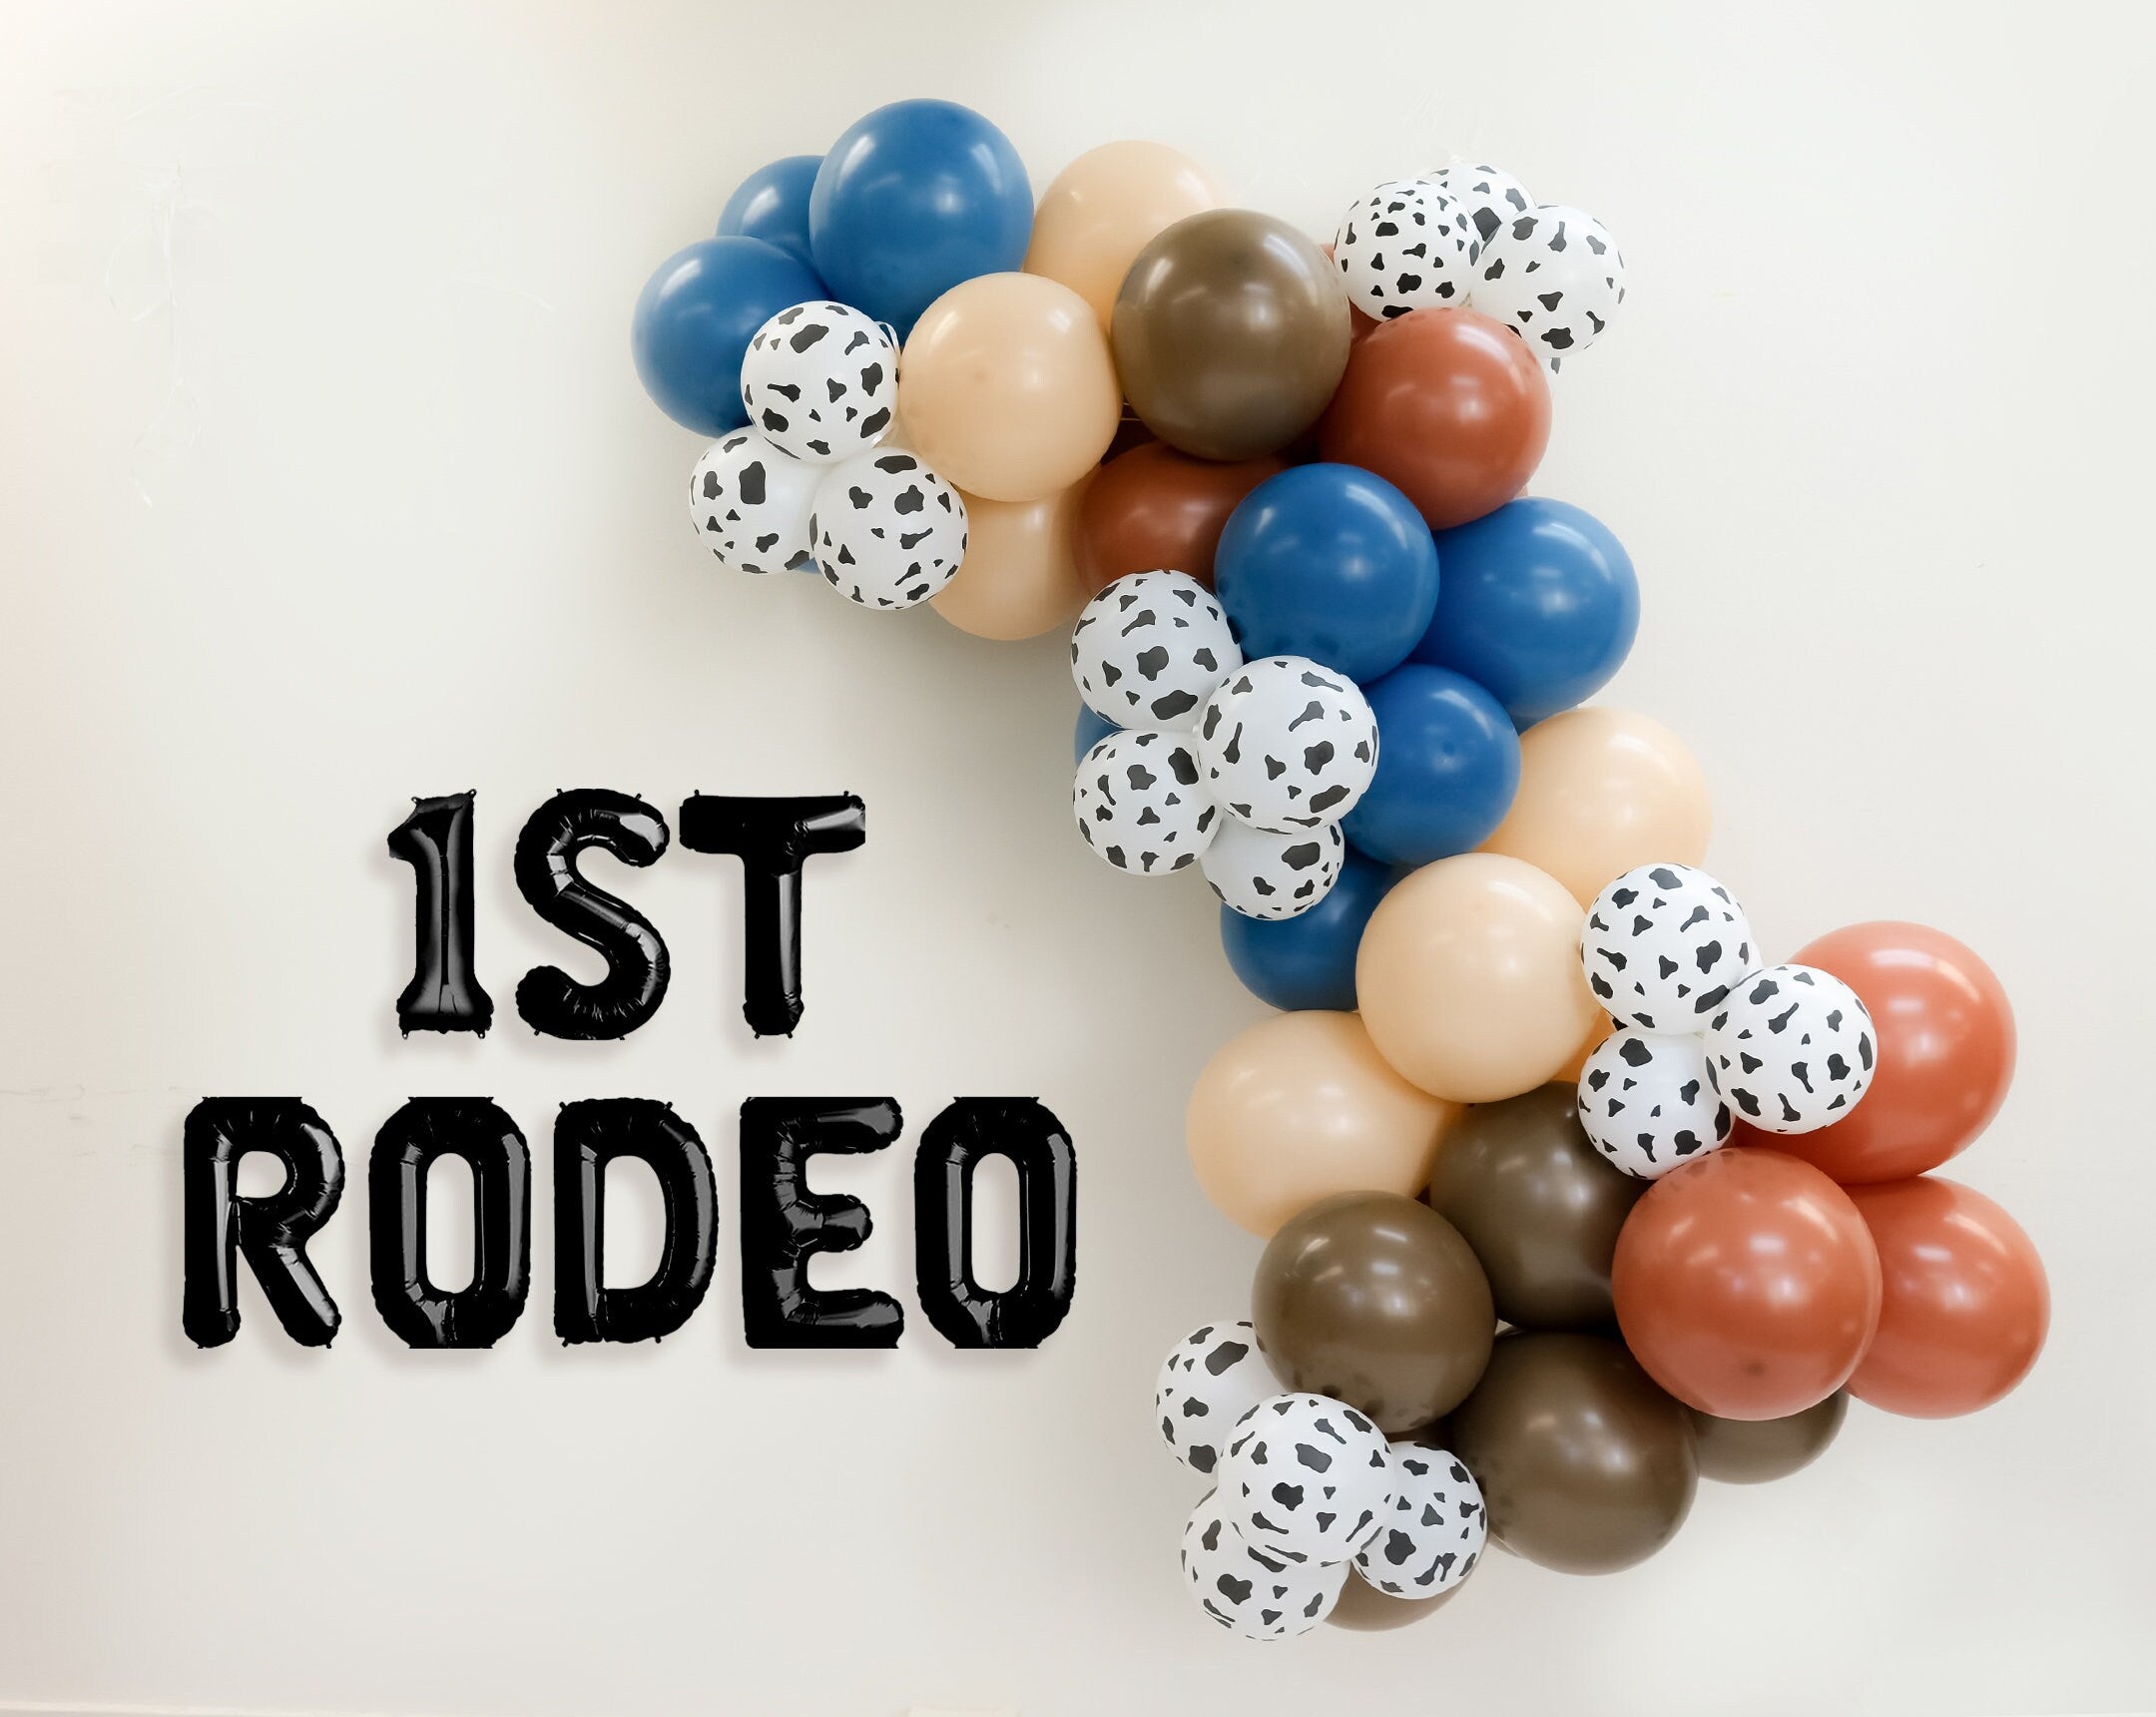 My First 1st Rodeo Wild West Balloon Arch Kit | Western Cowboy theme balloon garland | boy's 1st Western themed birthday party decors